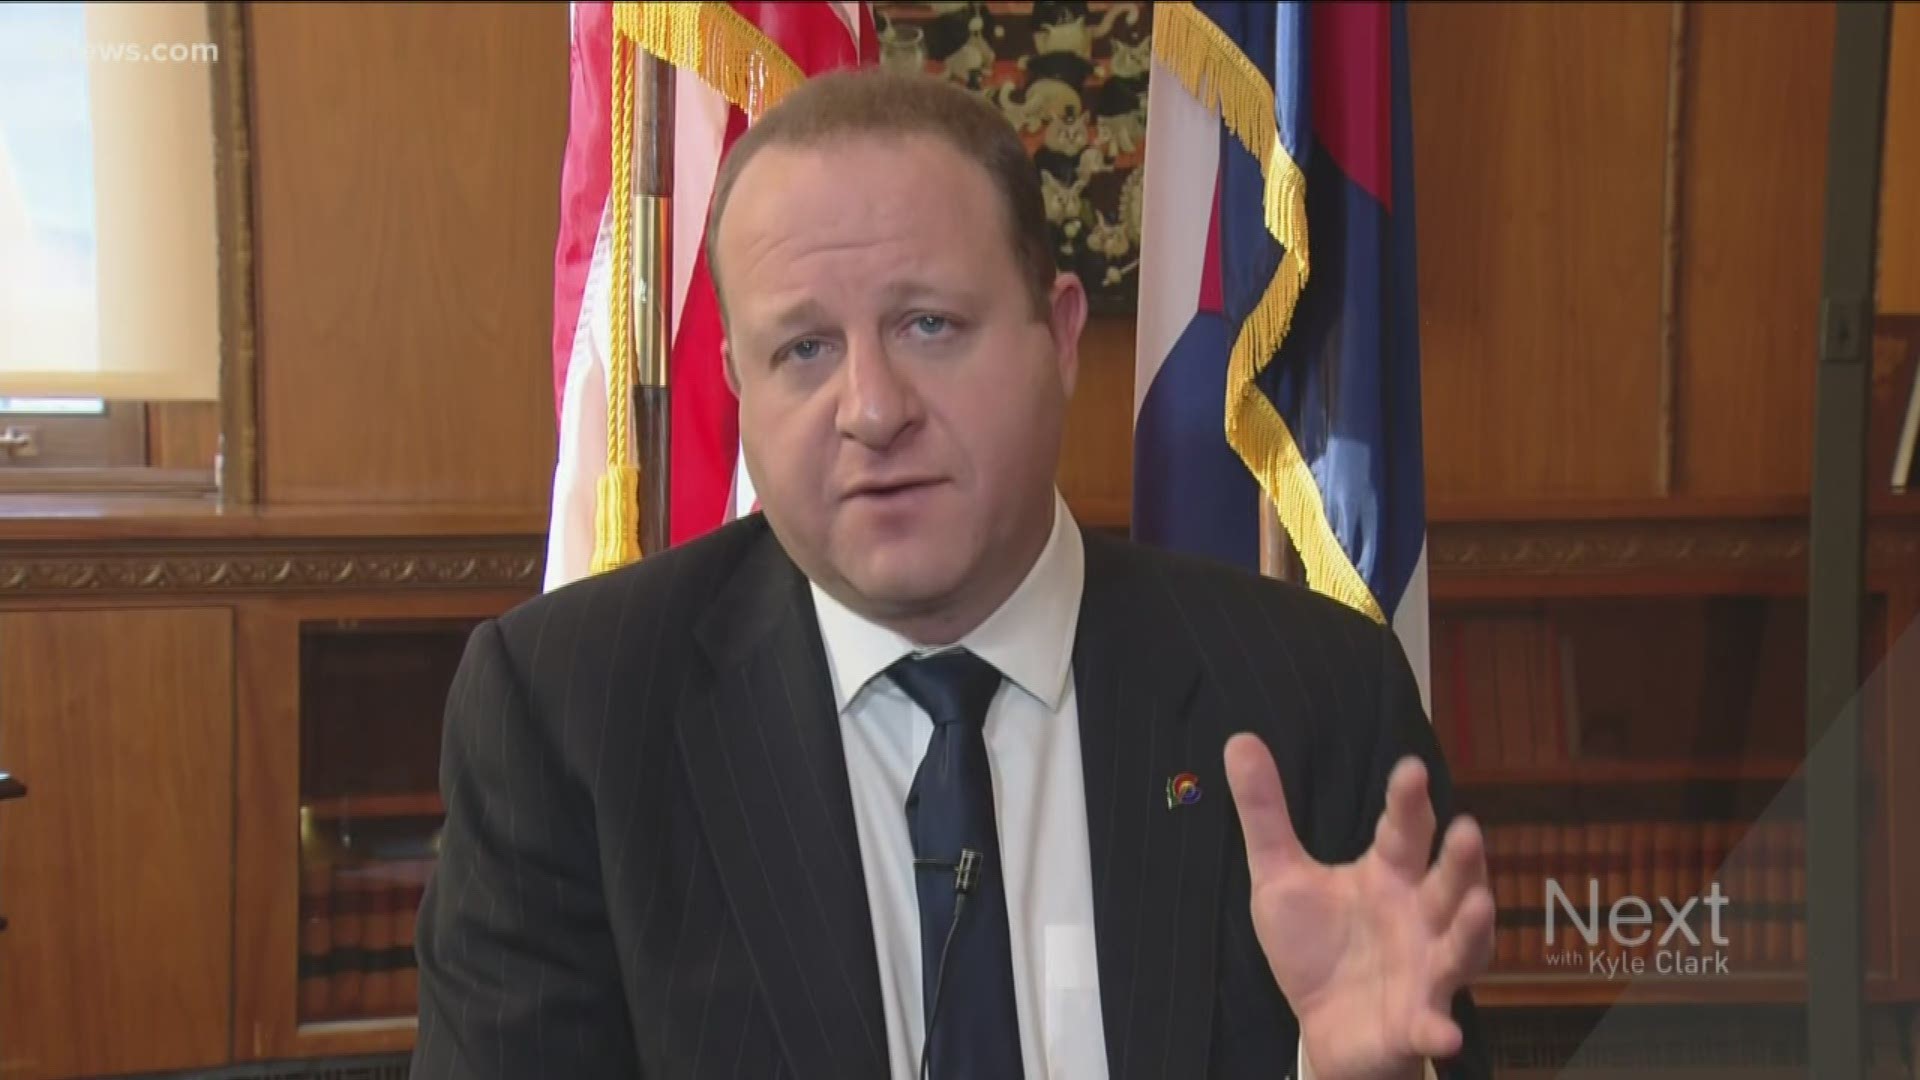 "This is no longer a novelty," said Colorado Gov. Jared Polis of the drones, following his second State of the State address.